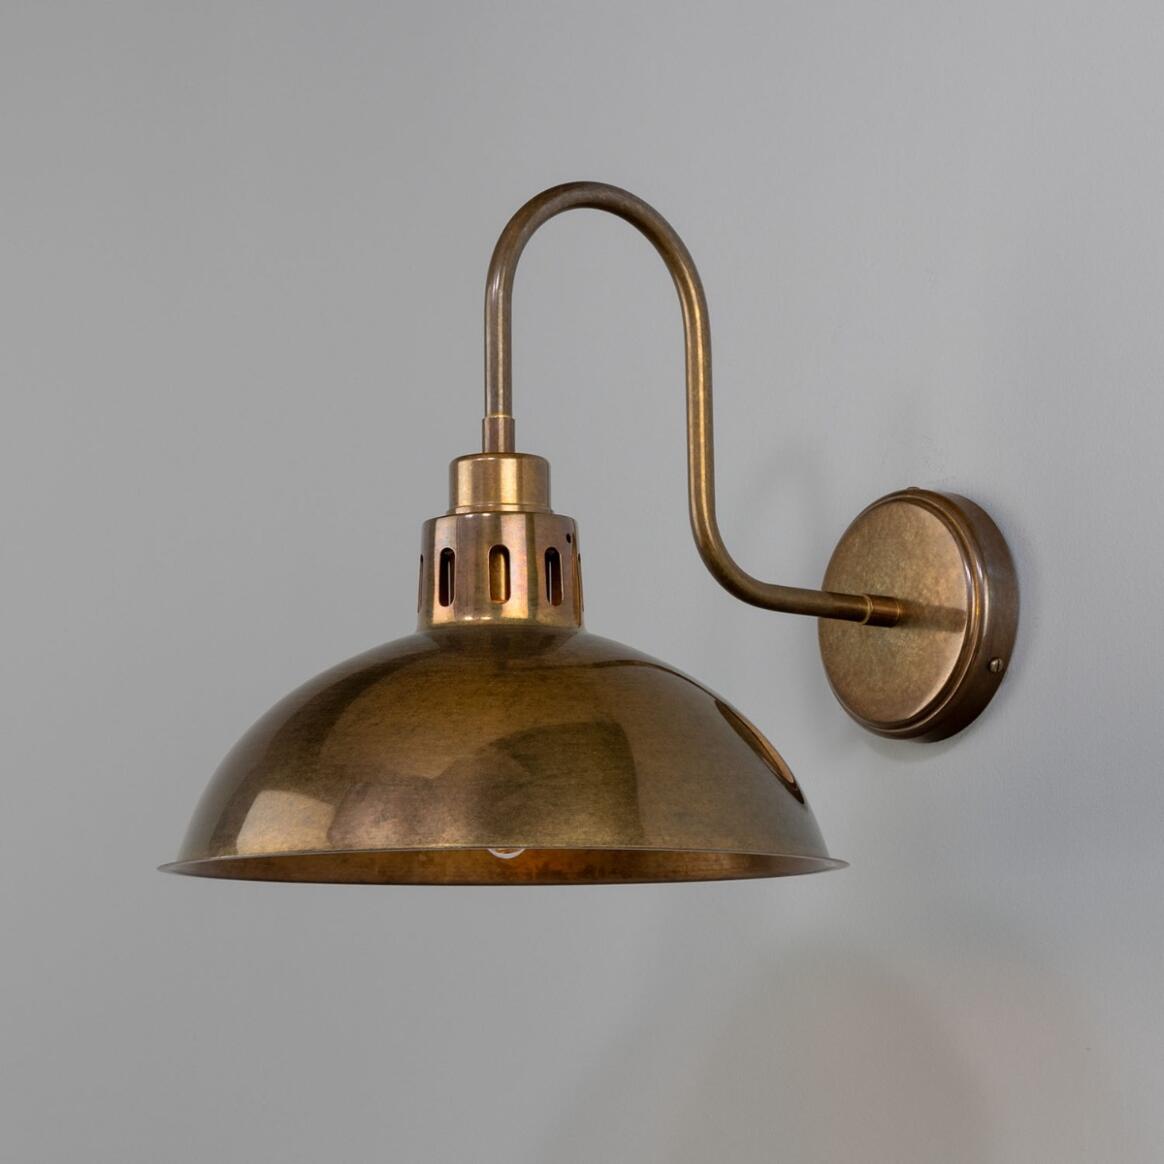 Paris Industrial Brass Swan Neck Wall Light 11.8" main product image